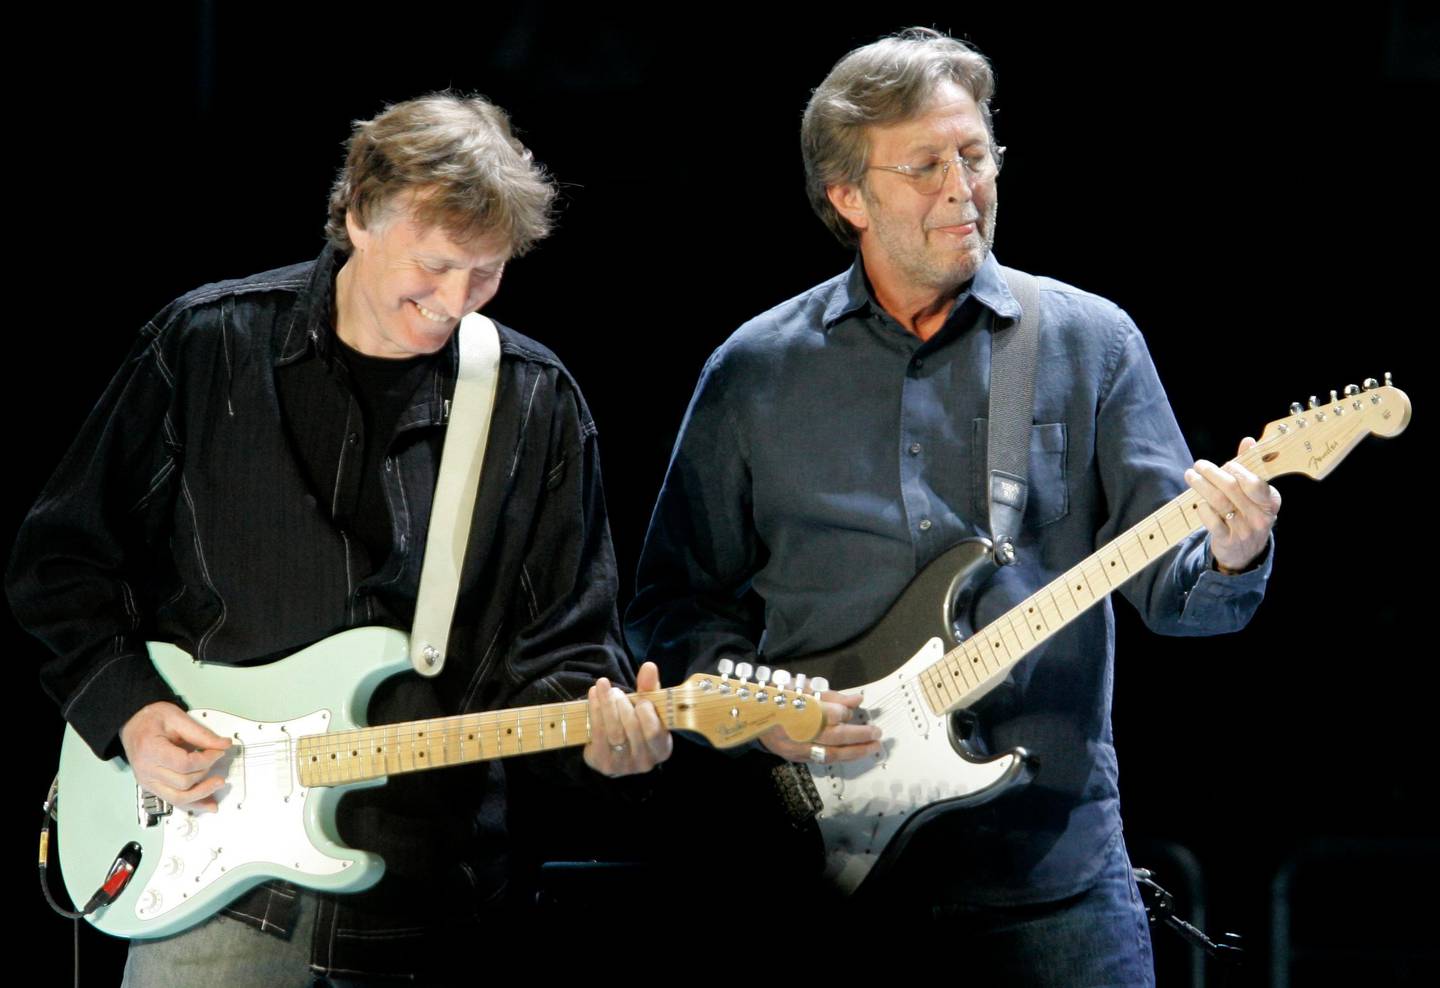 Former Blind Faith bandmates Steve Winwood, left, and Eric Clapton perform Monday evening Feb. 25, 2008, during the first of their three concerts at New York's Madison Square Garden. (AP Photo/Richard Drew)